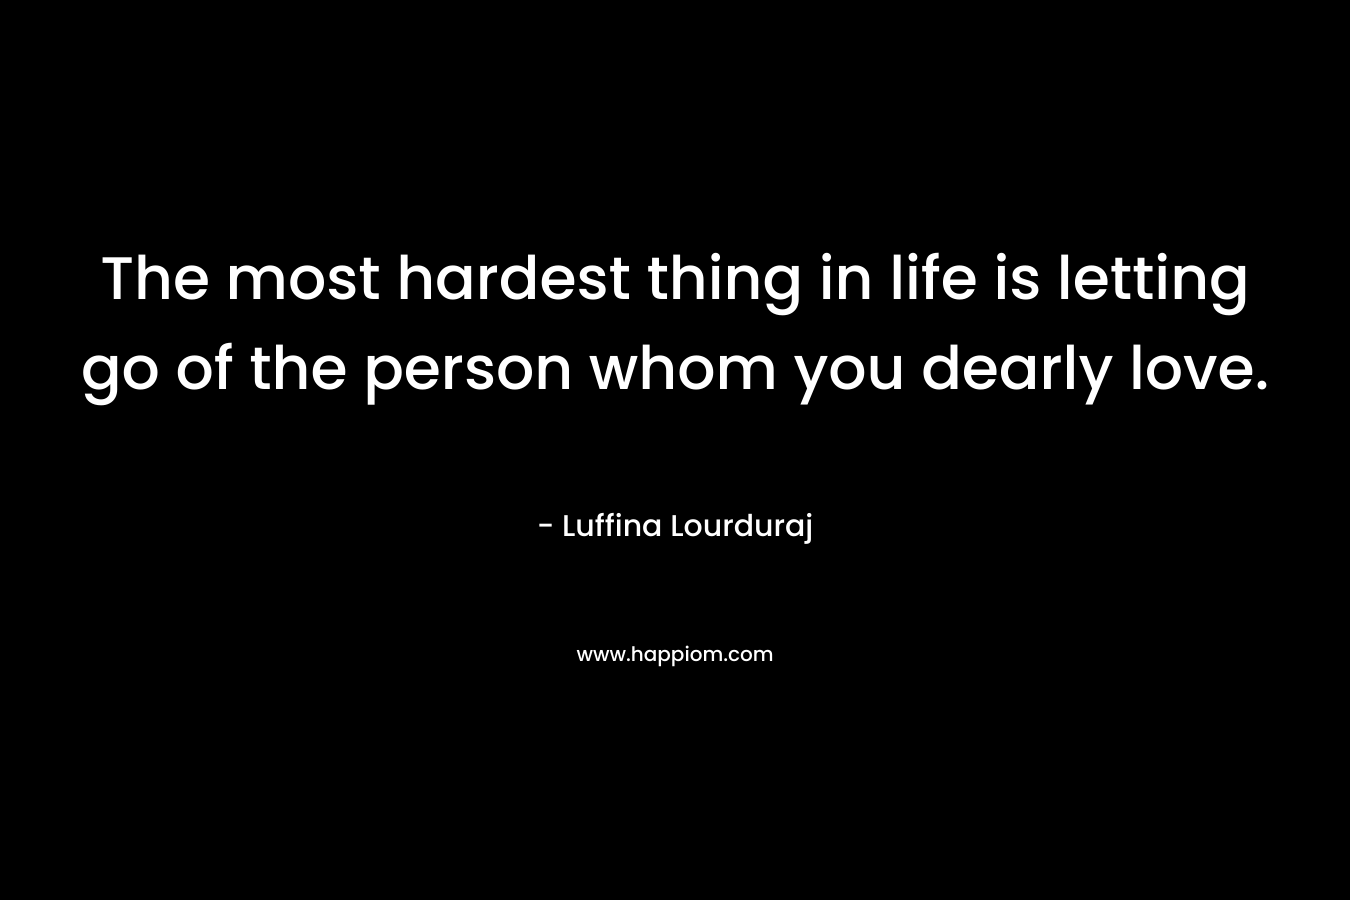 The most hardest thing in life is letting go of the person whom you dearly love. – Luffina Lourduraj